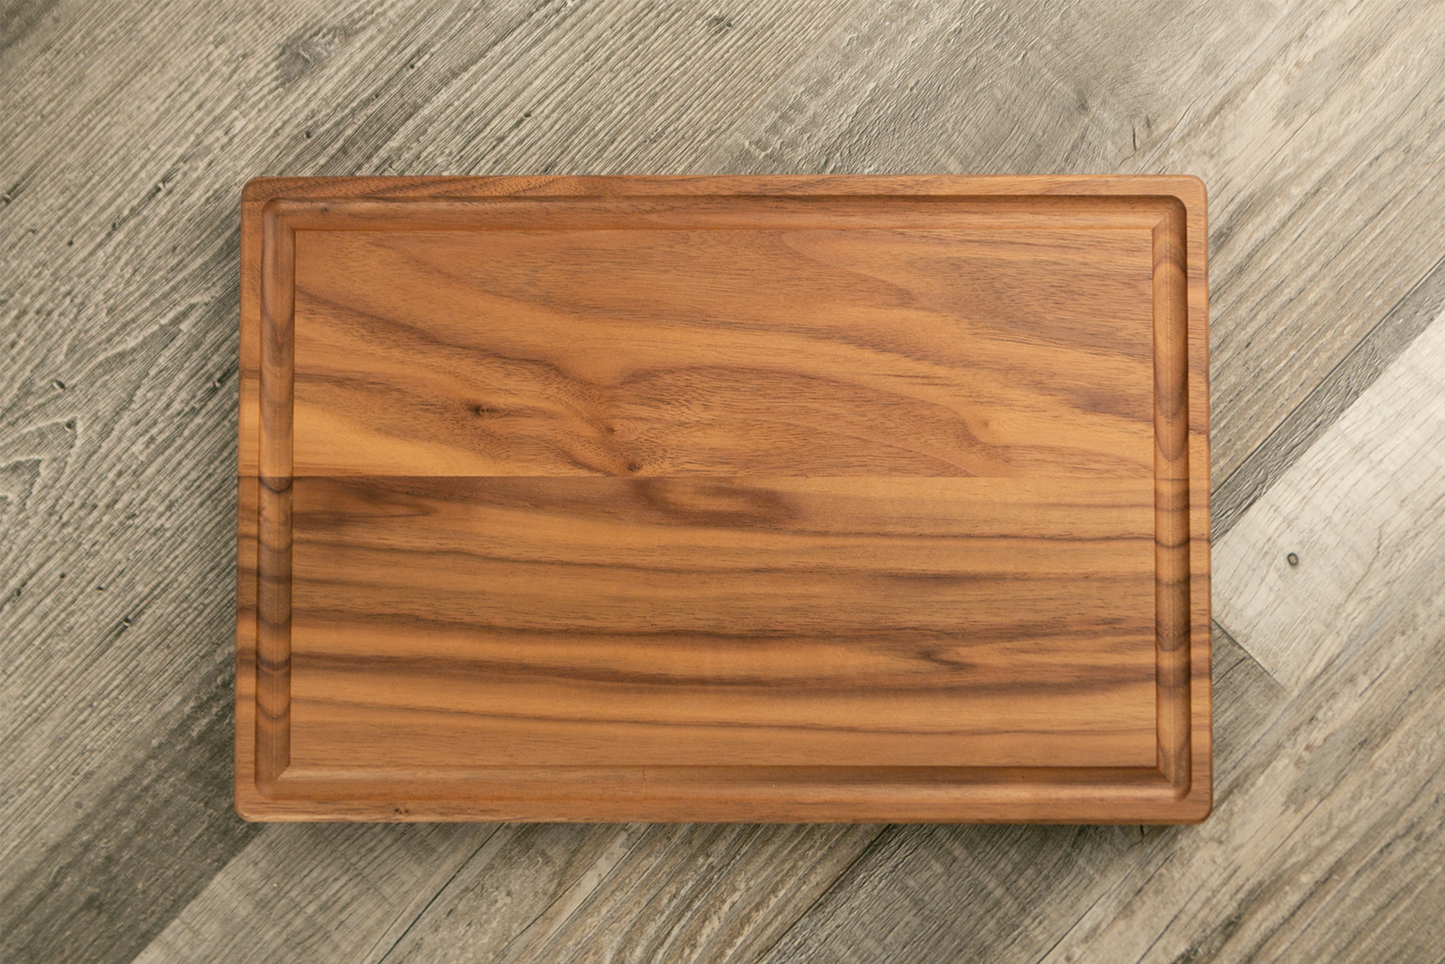 Walnut Charcuterie / Cutting Board - 8"x12" Rectangle with Juice Groove